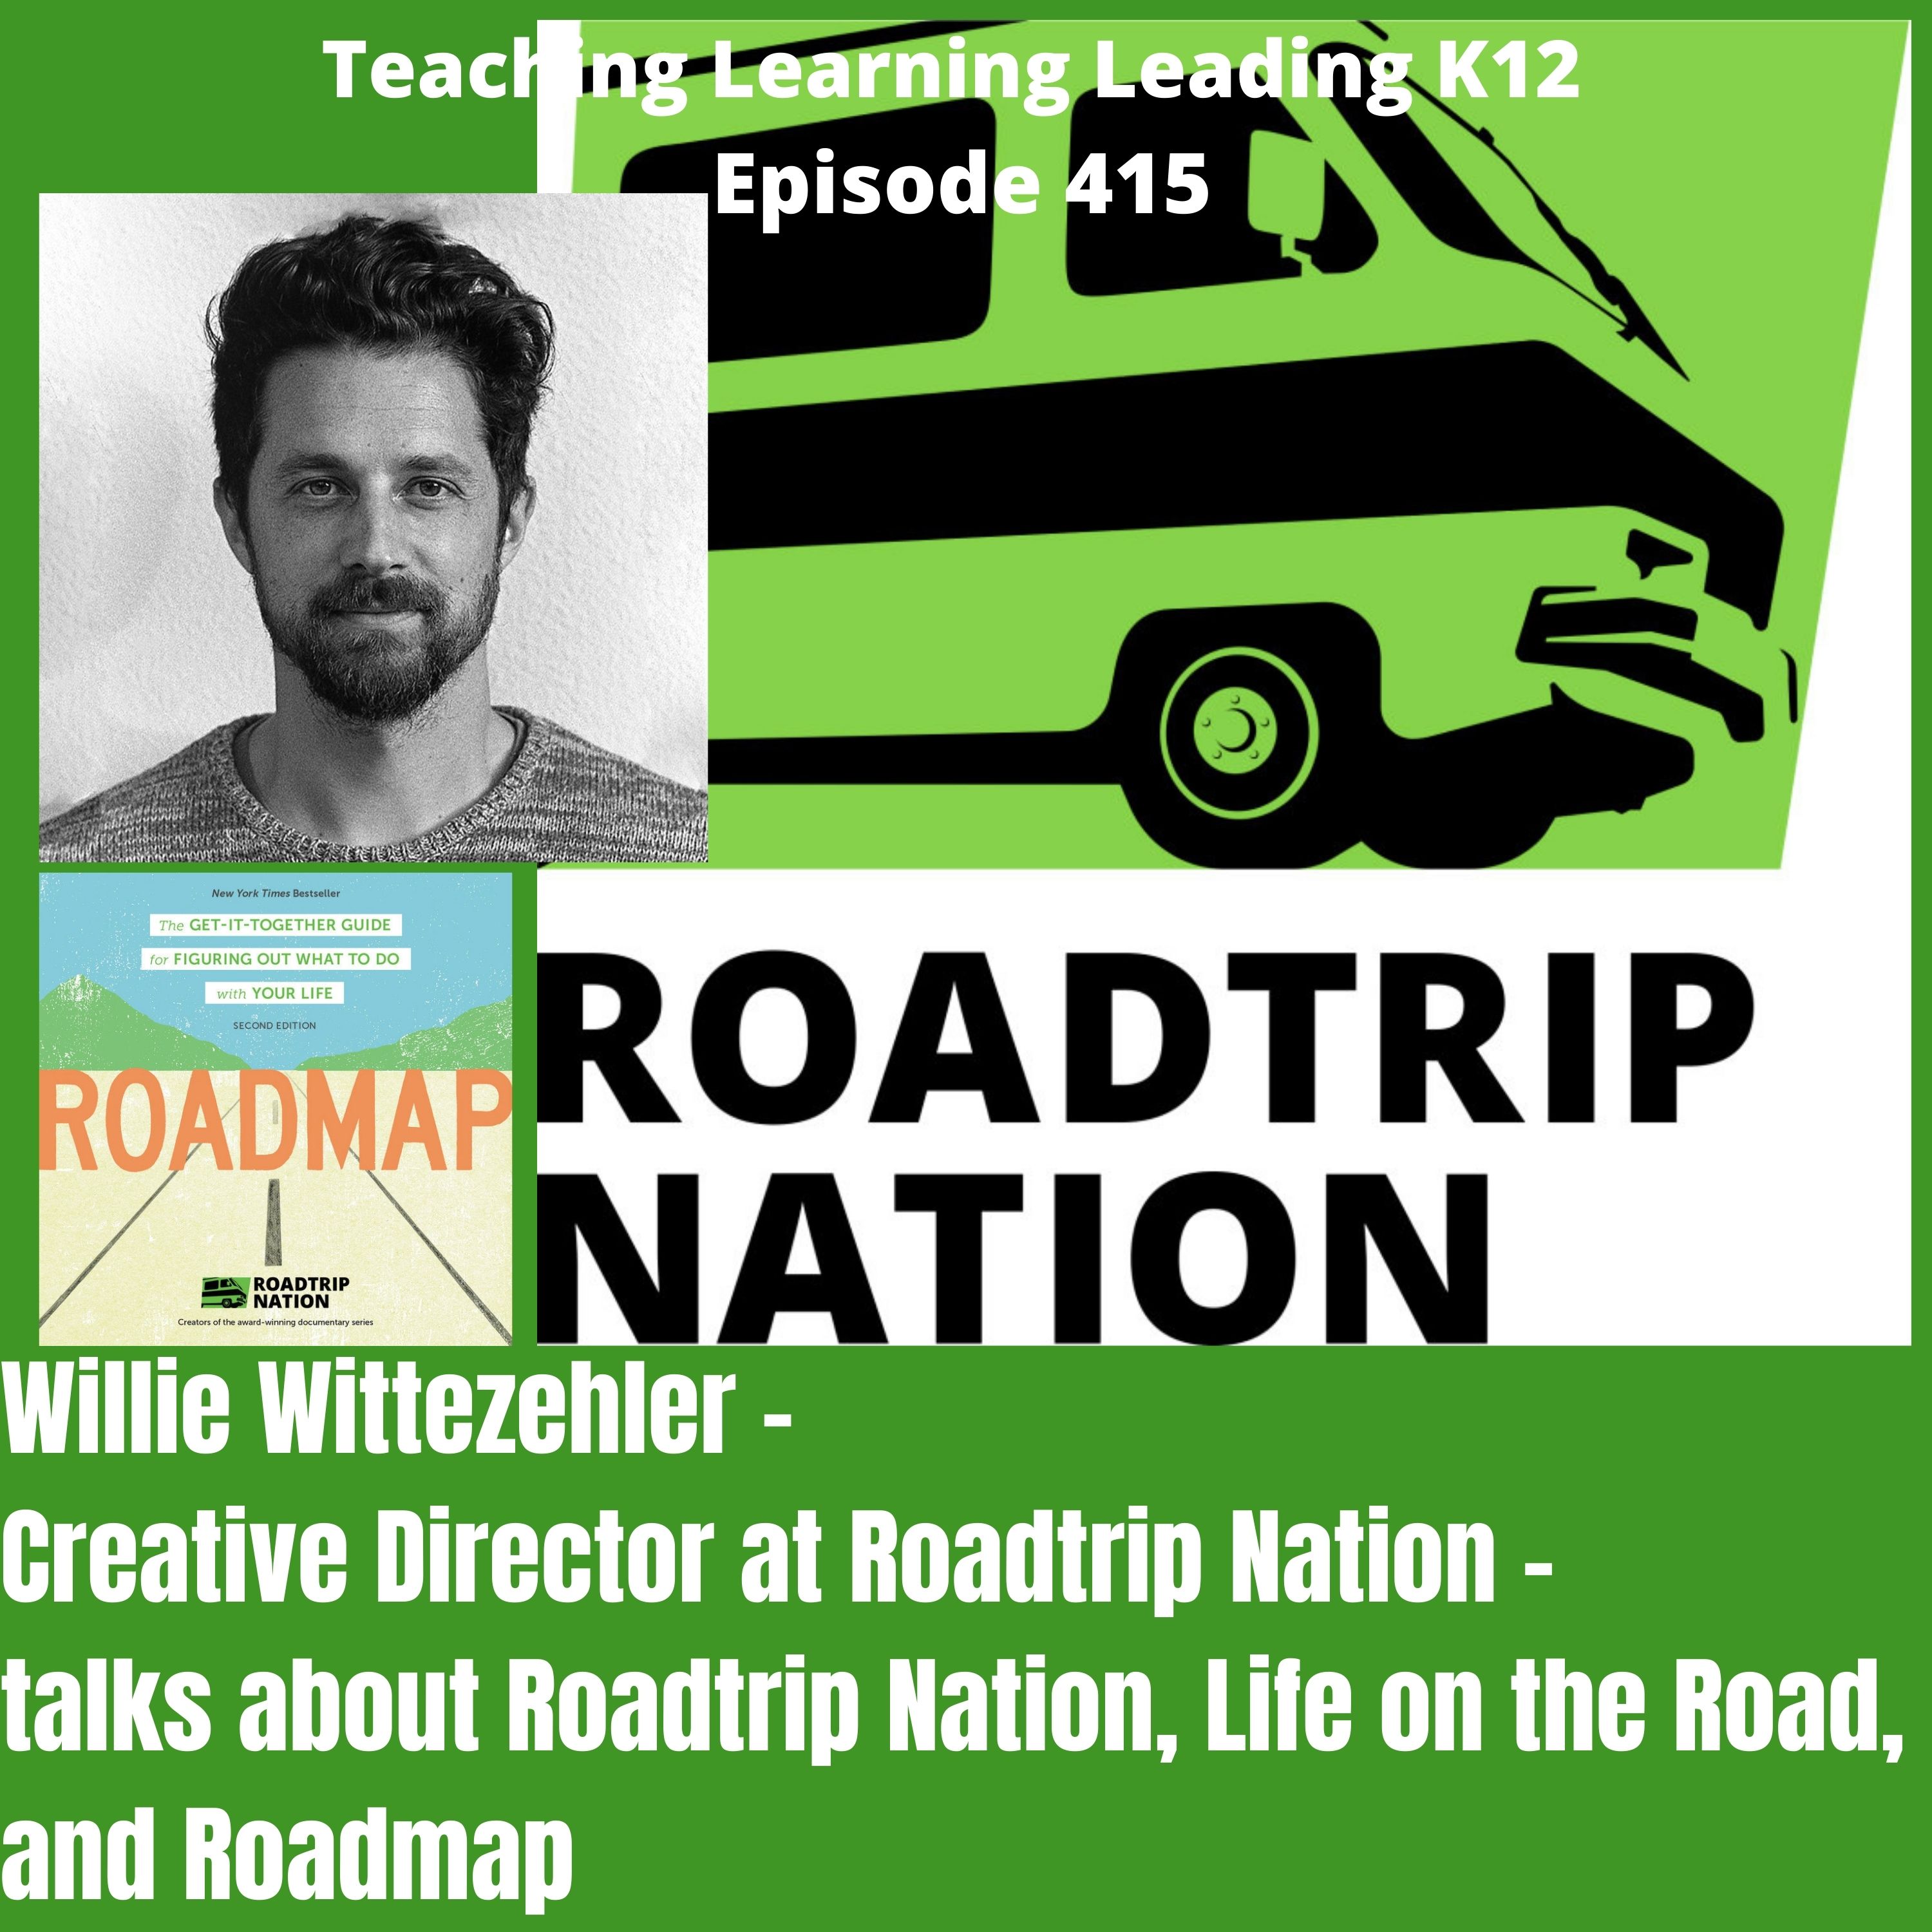 Willie Wittezehler - Creative Director at Roadtrip Nation - Talks About Roadtrip Nation, Life on the Road, and Roadmap - 415